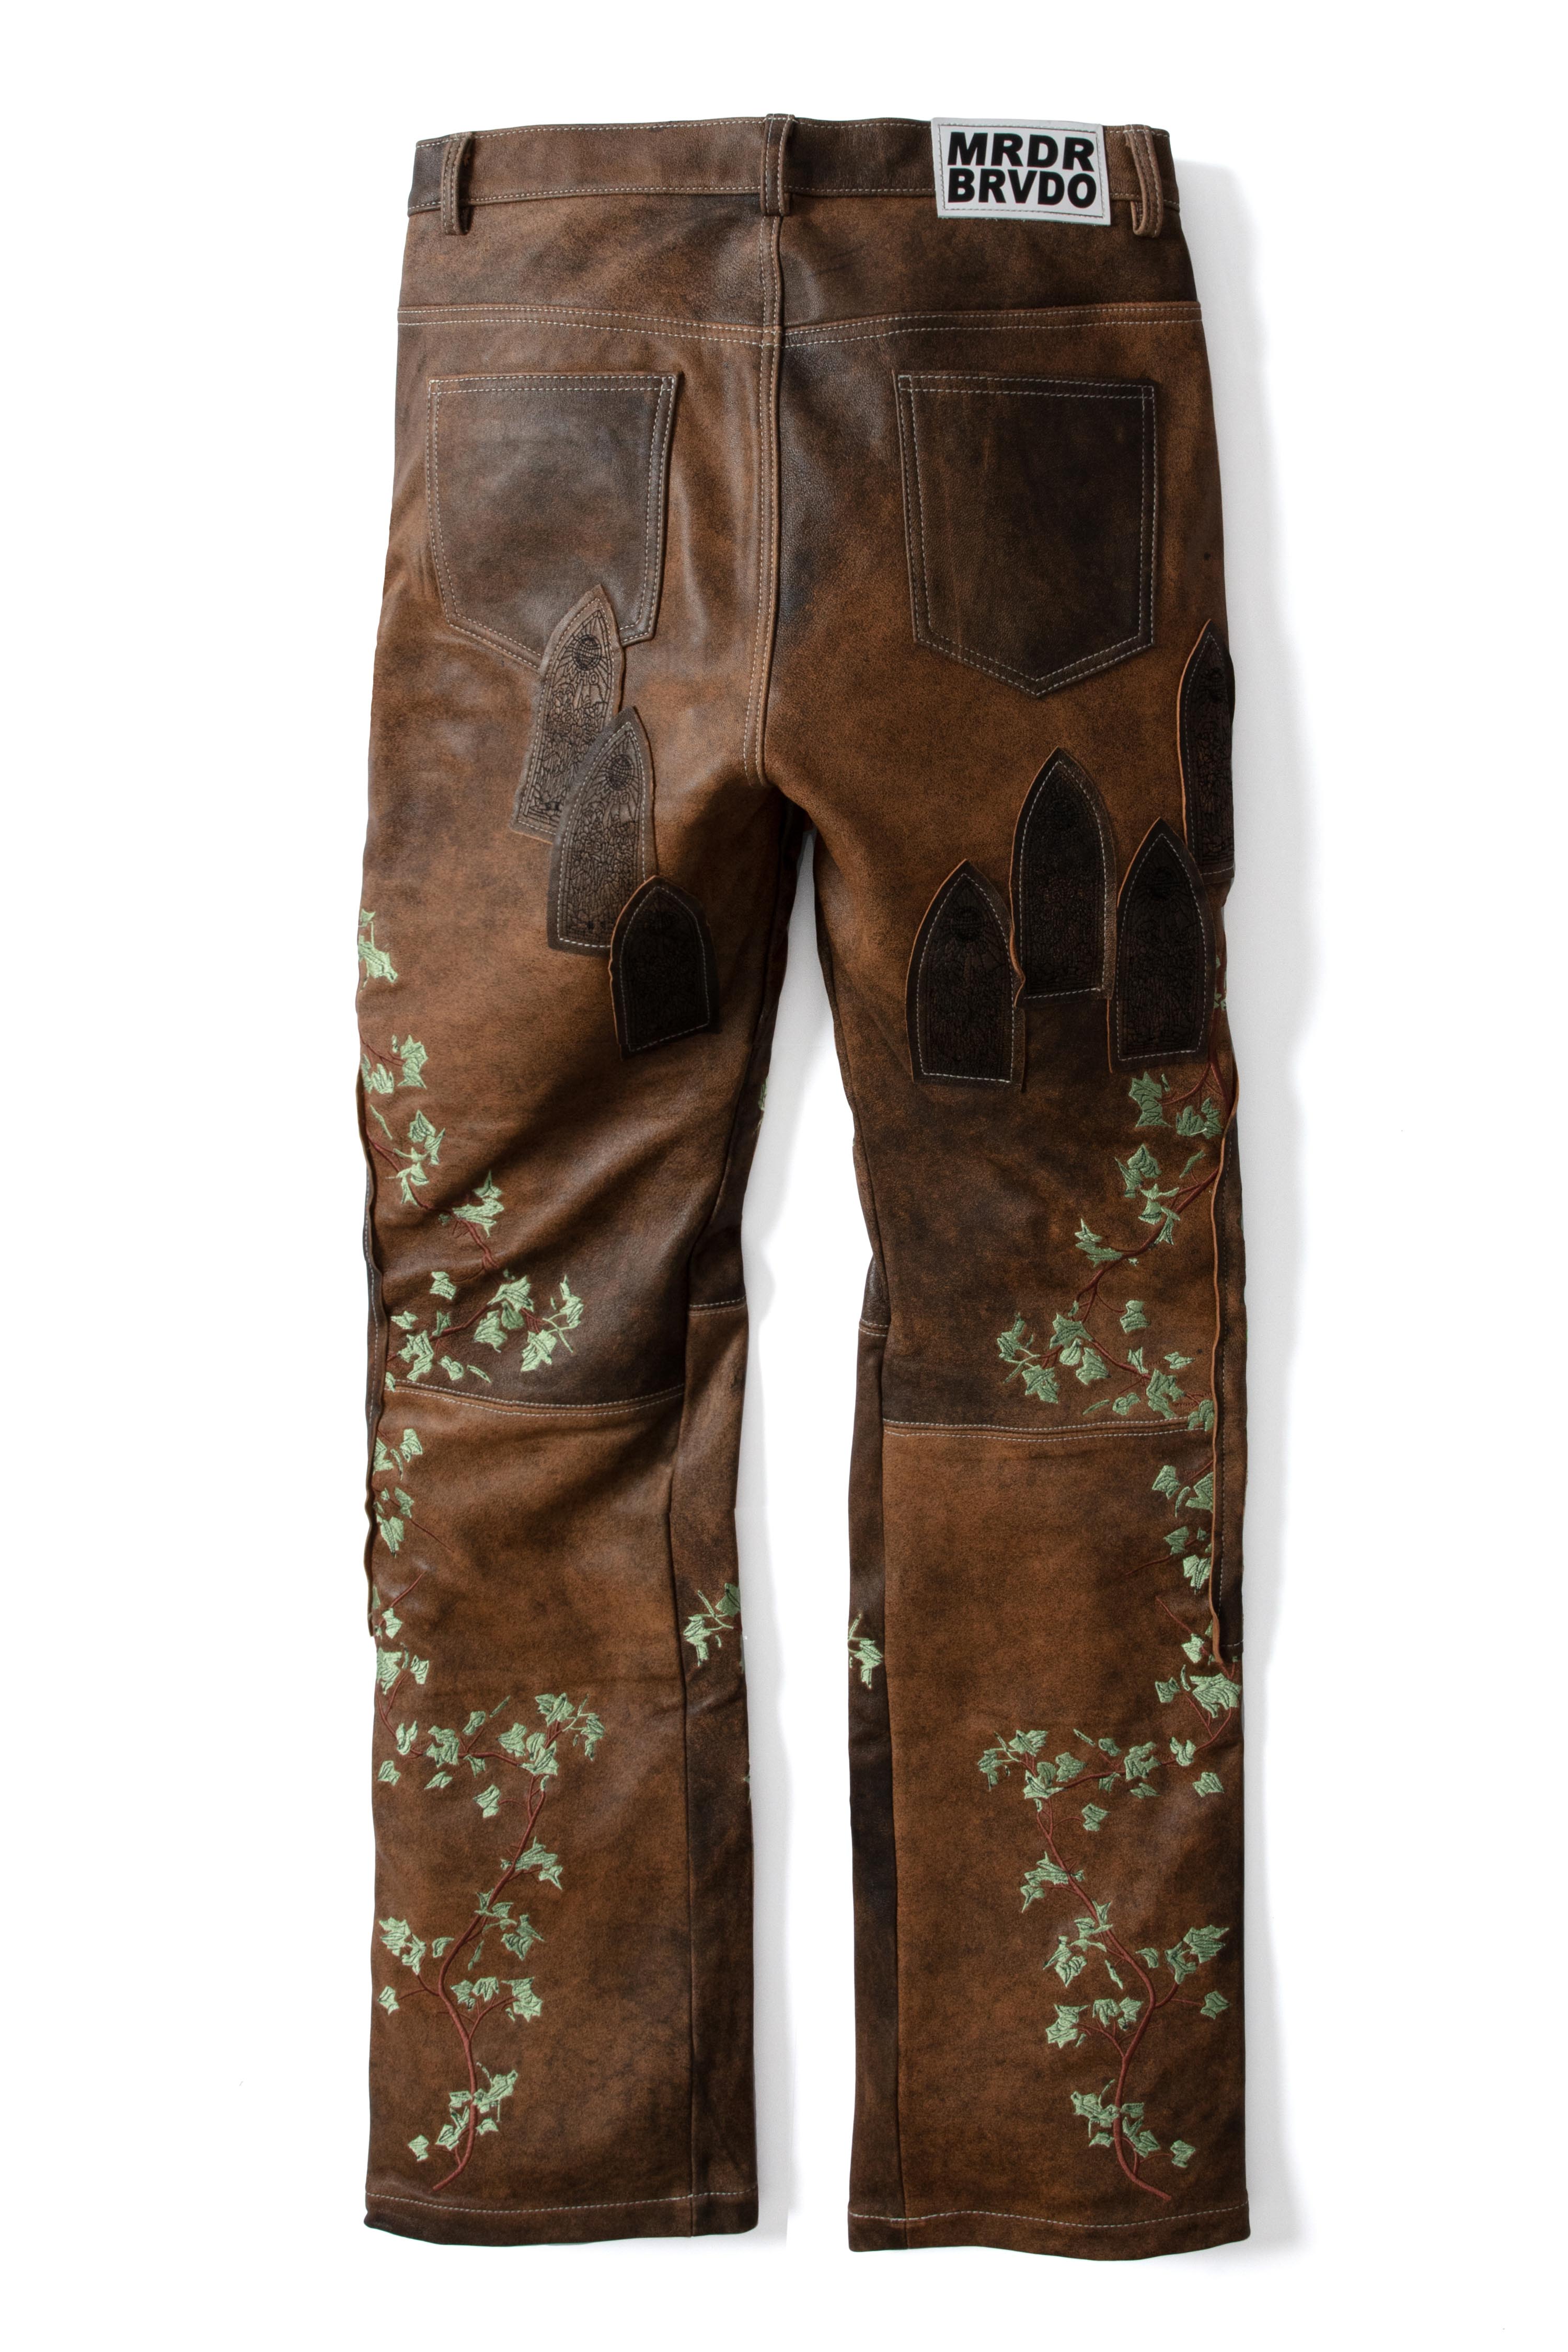 GARDEN GLASS PATCHED PANT